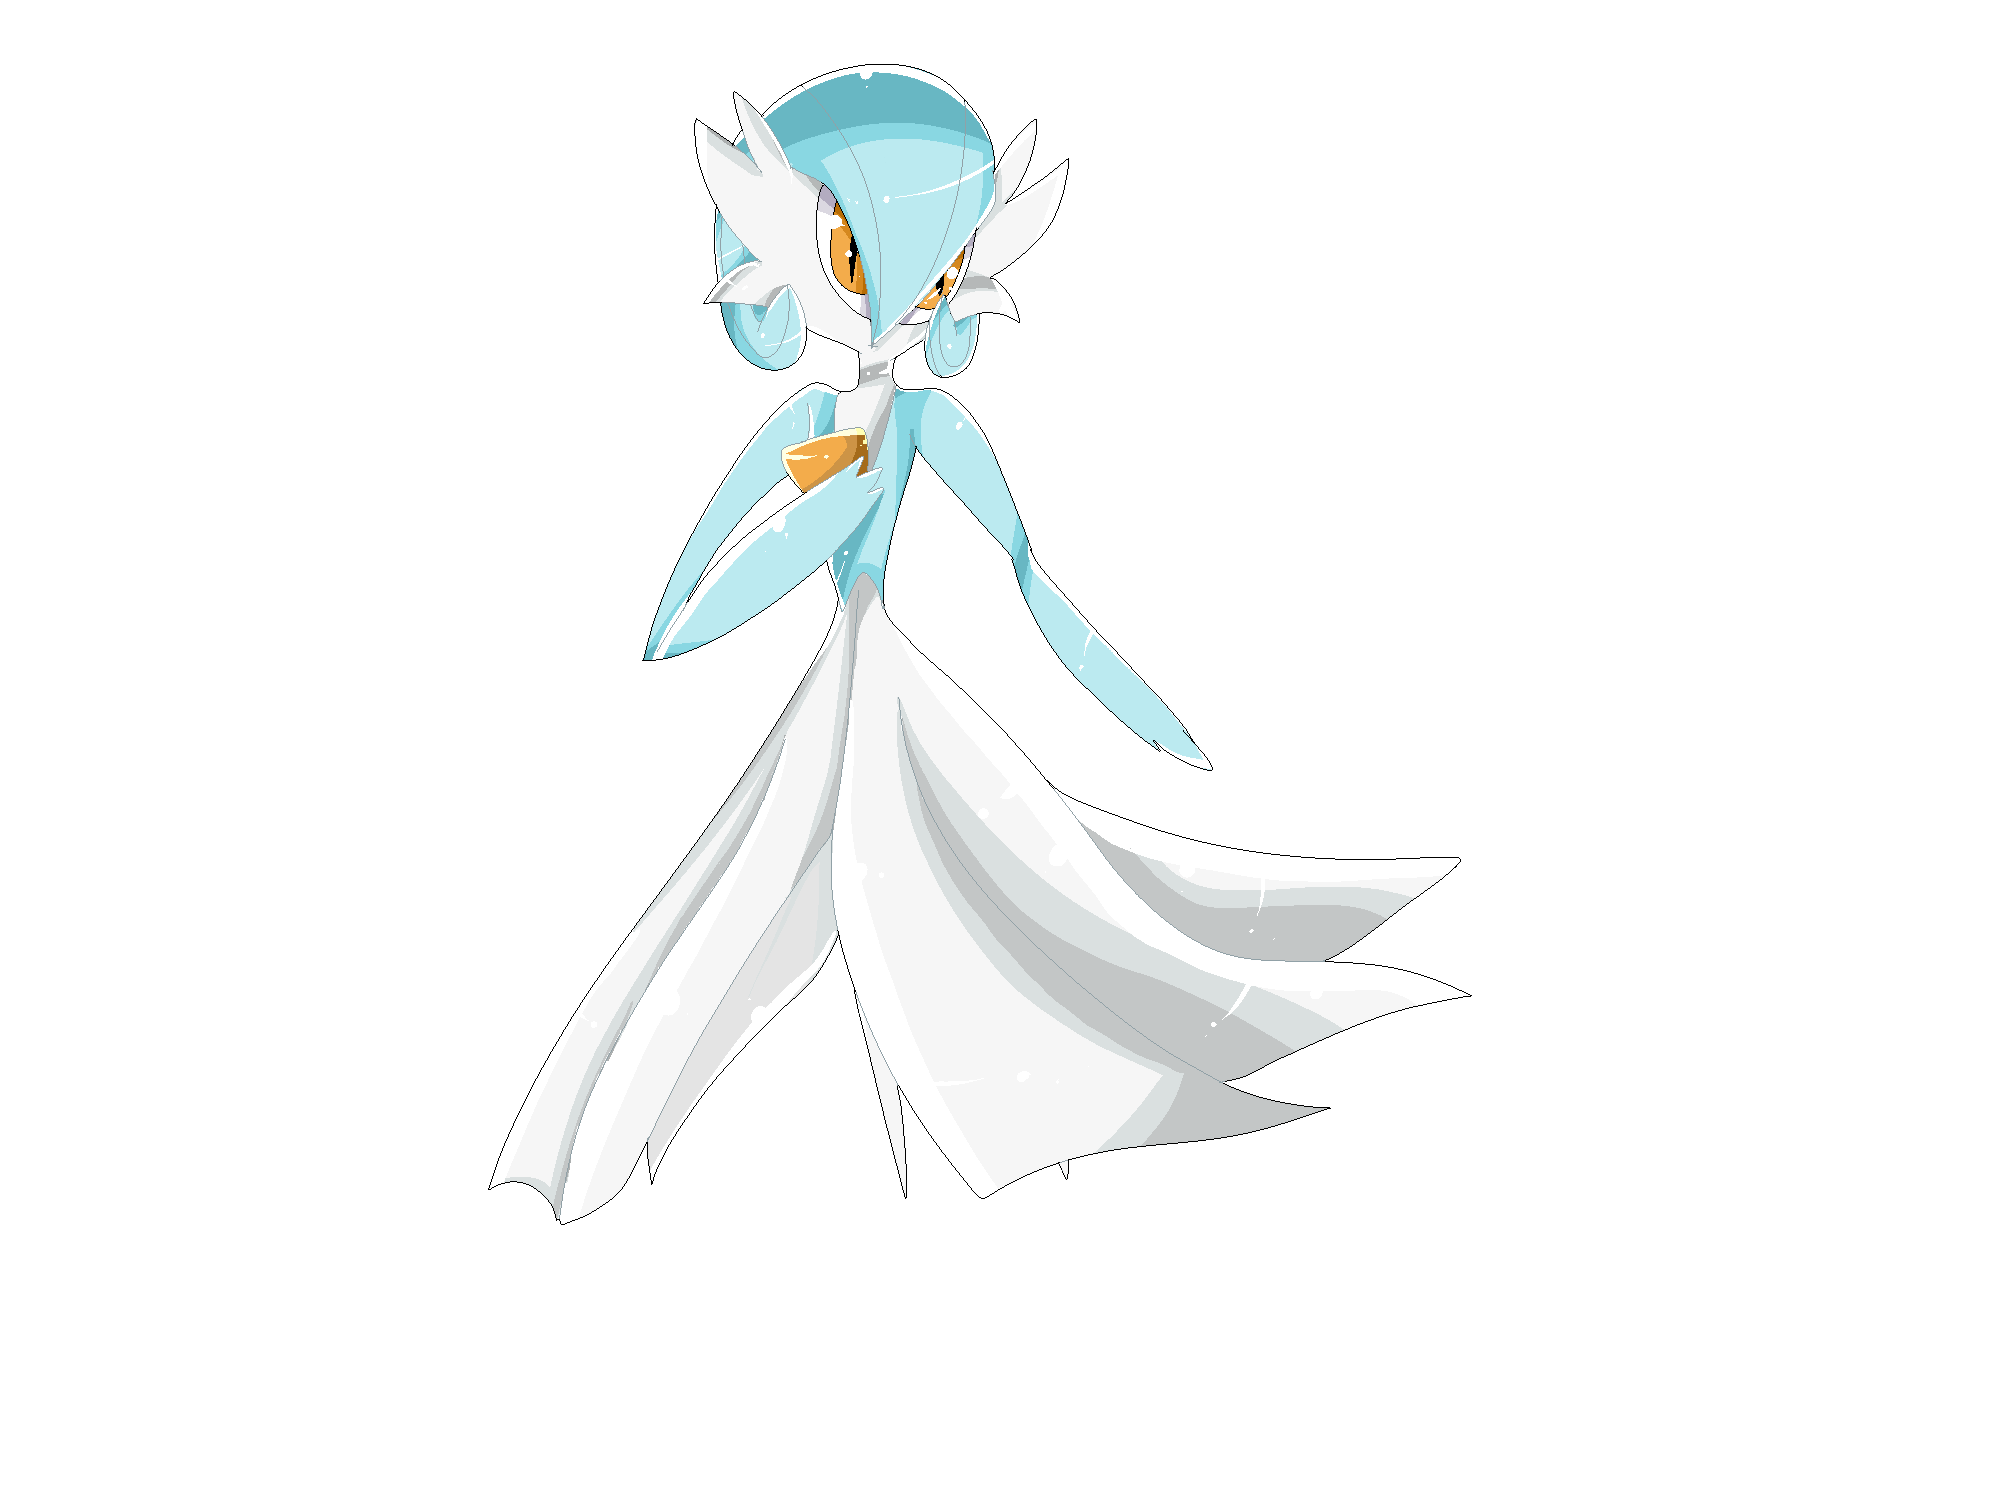 Touching Shiny Gardevoir by ClairePxl on DeviantArt